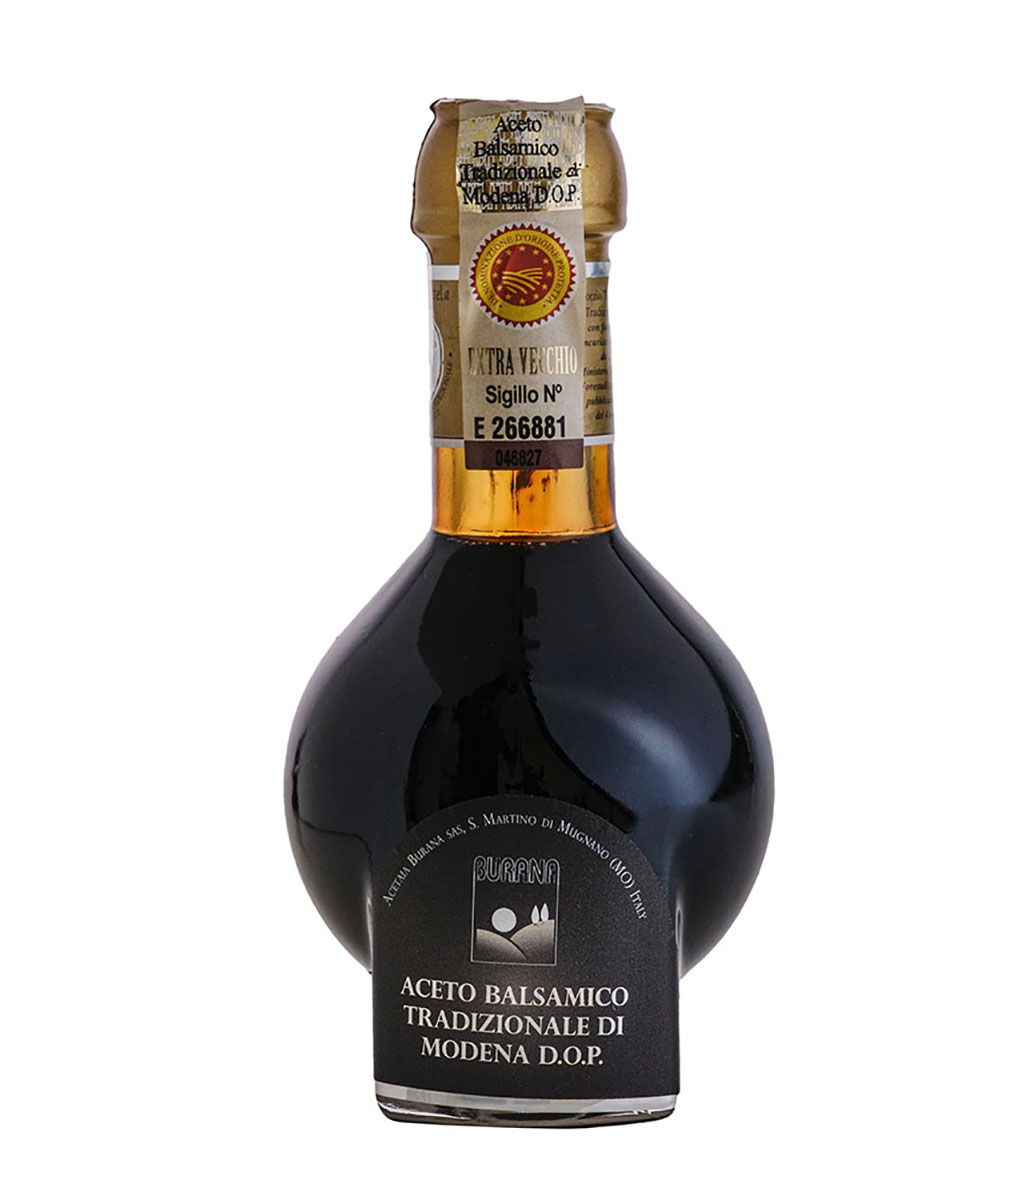 Traditional balsamic vinegar of Modena D.O.P 25 years